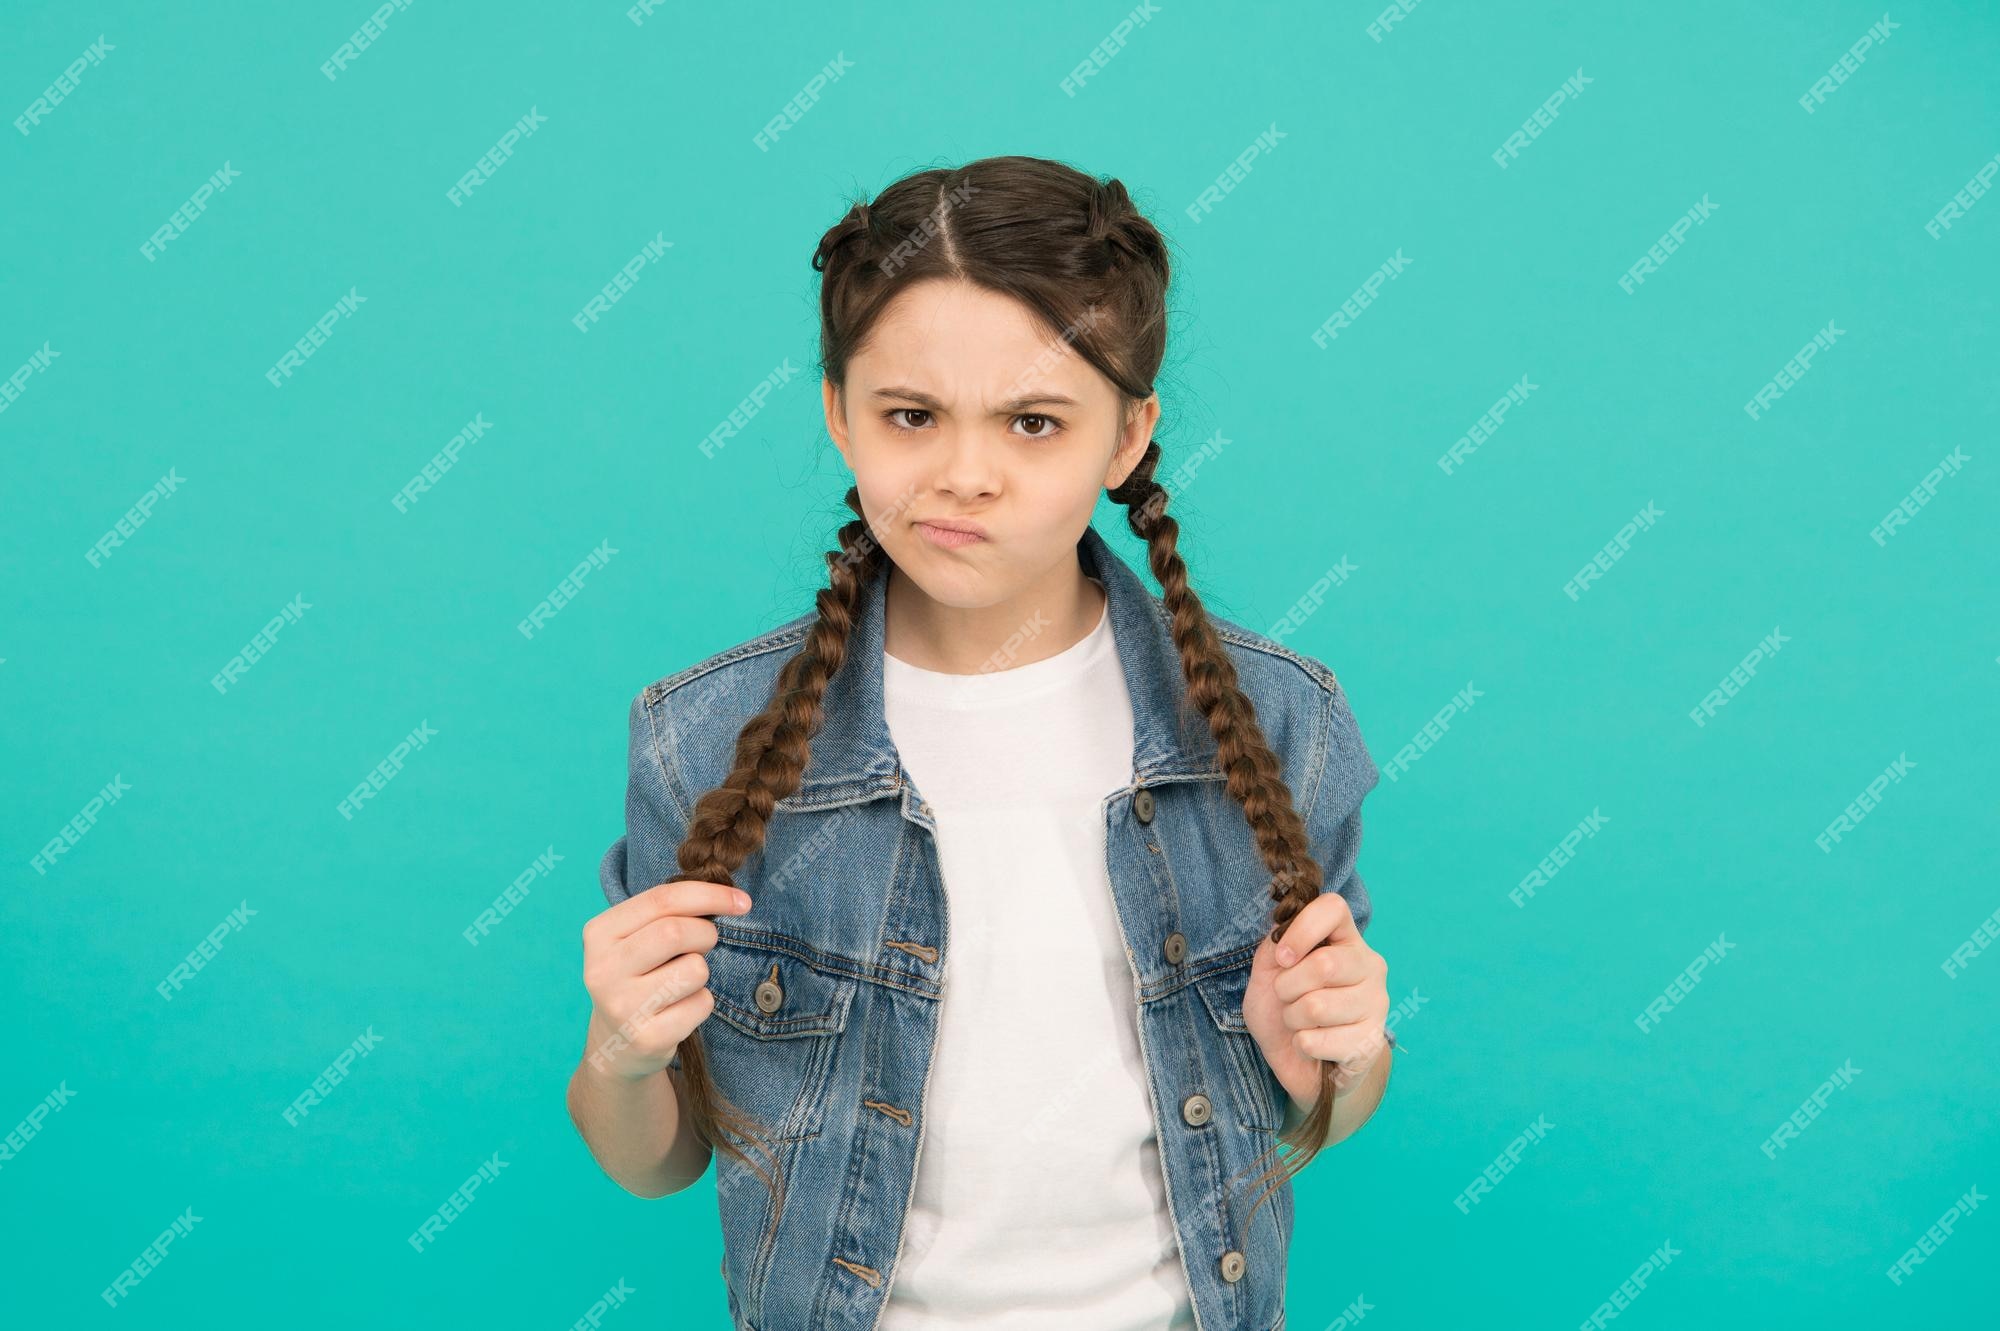 Premium Photo | Look of discontent unhappy girl with braided hairstyle  beauty look of little child casual fashion look trendy style childrens clothing  hair salon update your look